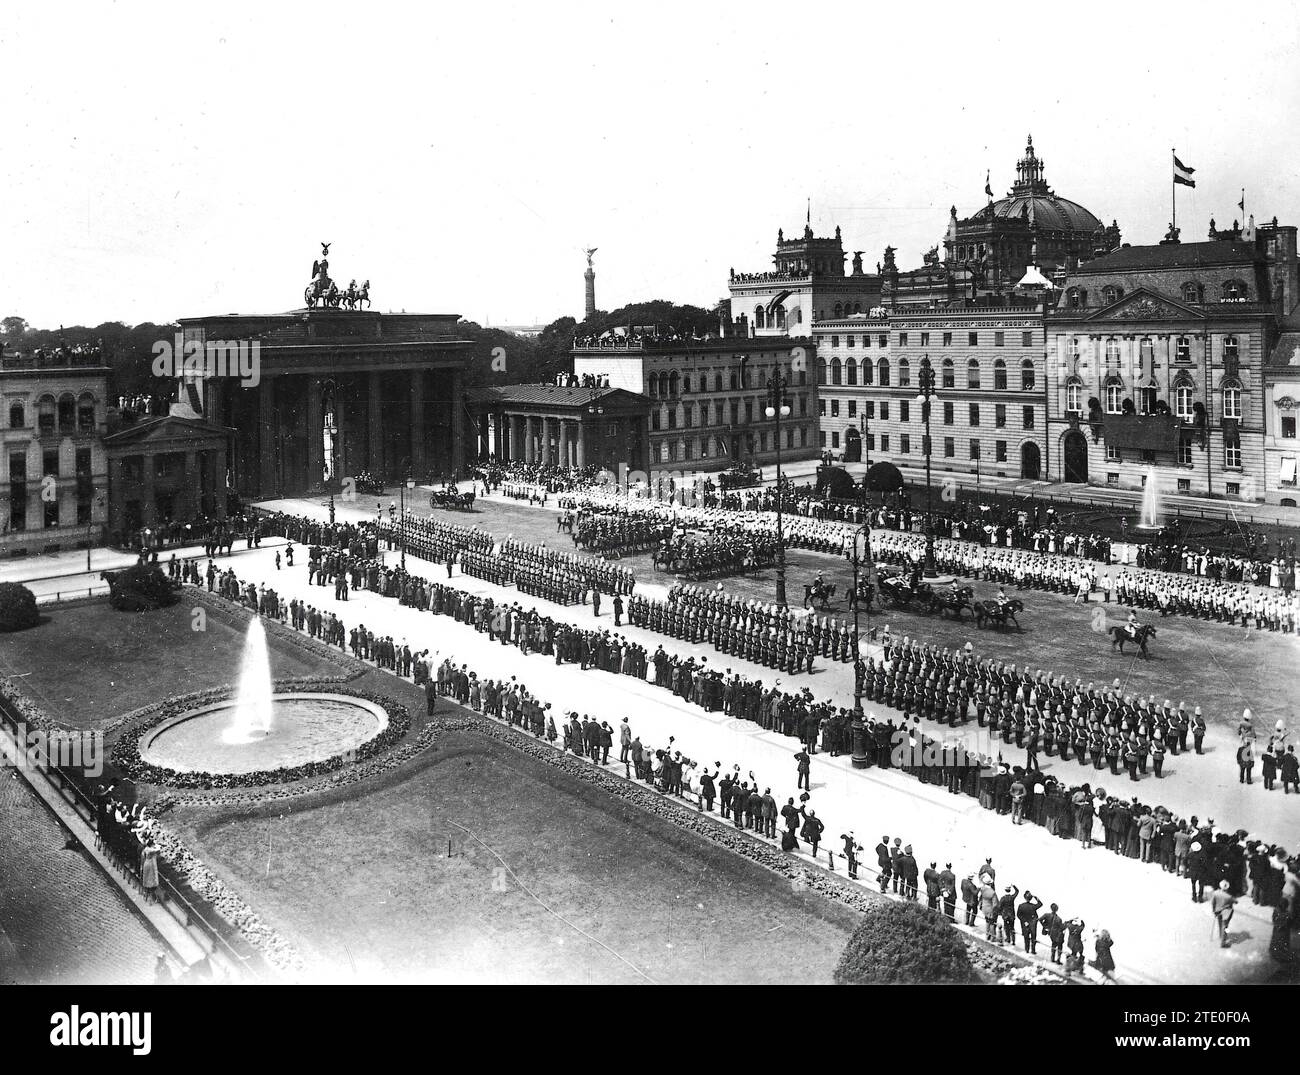 04/30/1913. The wedding of the Princess of Germany. Appearance of the Pariser Platz as the procession of the Tsar of Russia passes from the A palace station. Credit: Album / Archivo ABC / Charles Trampus Stock Photo